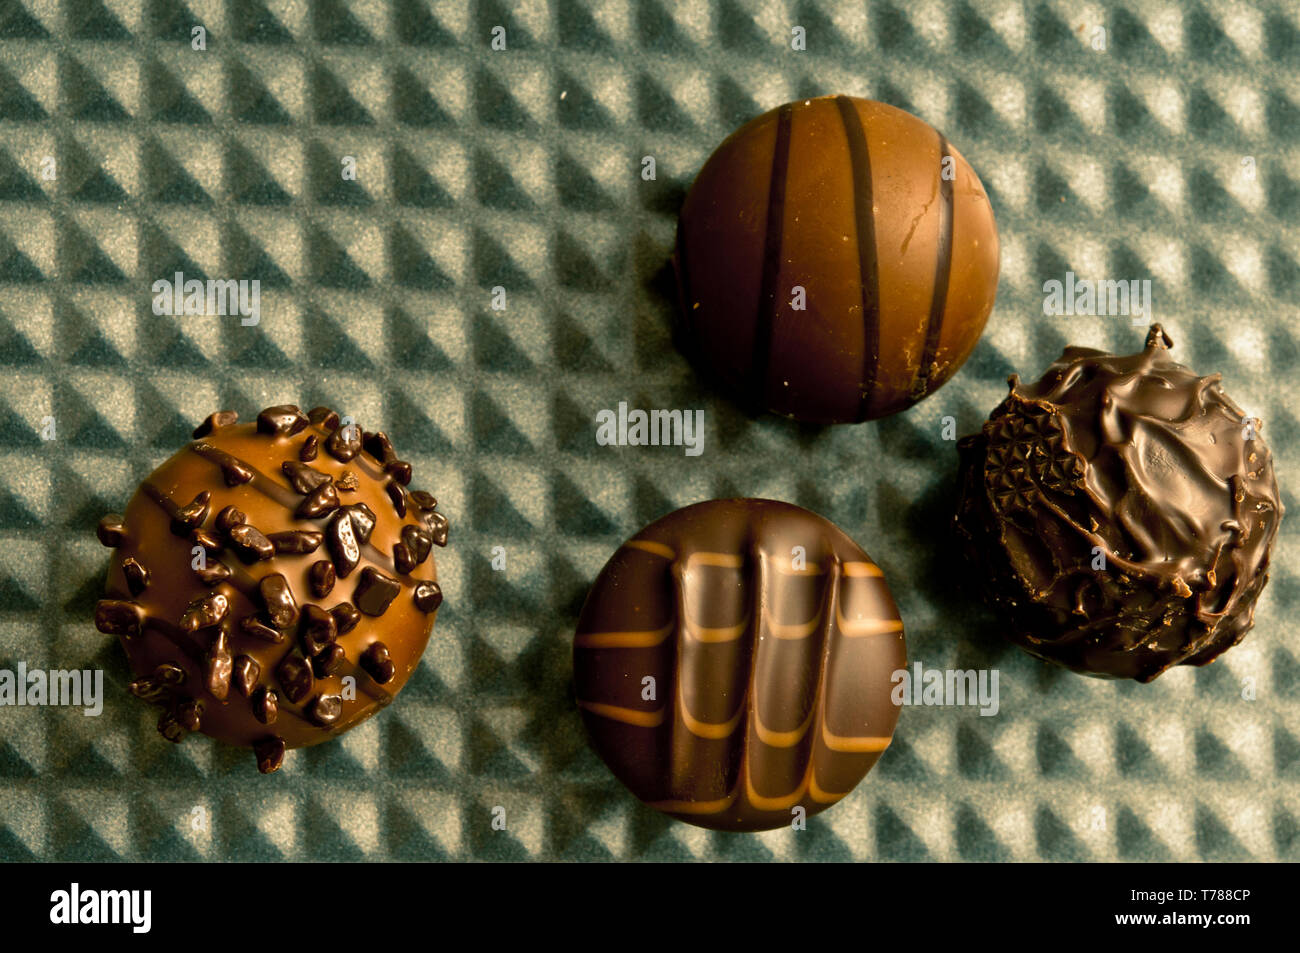 Belgian chocolate bonbons or pralines on a metal surface Stock Photo